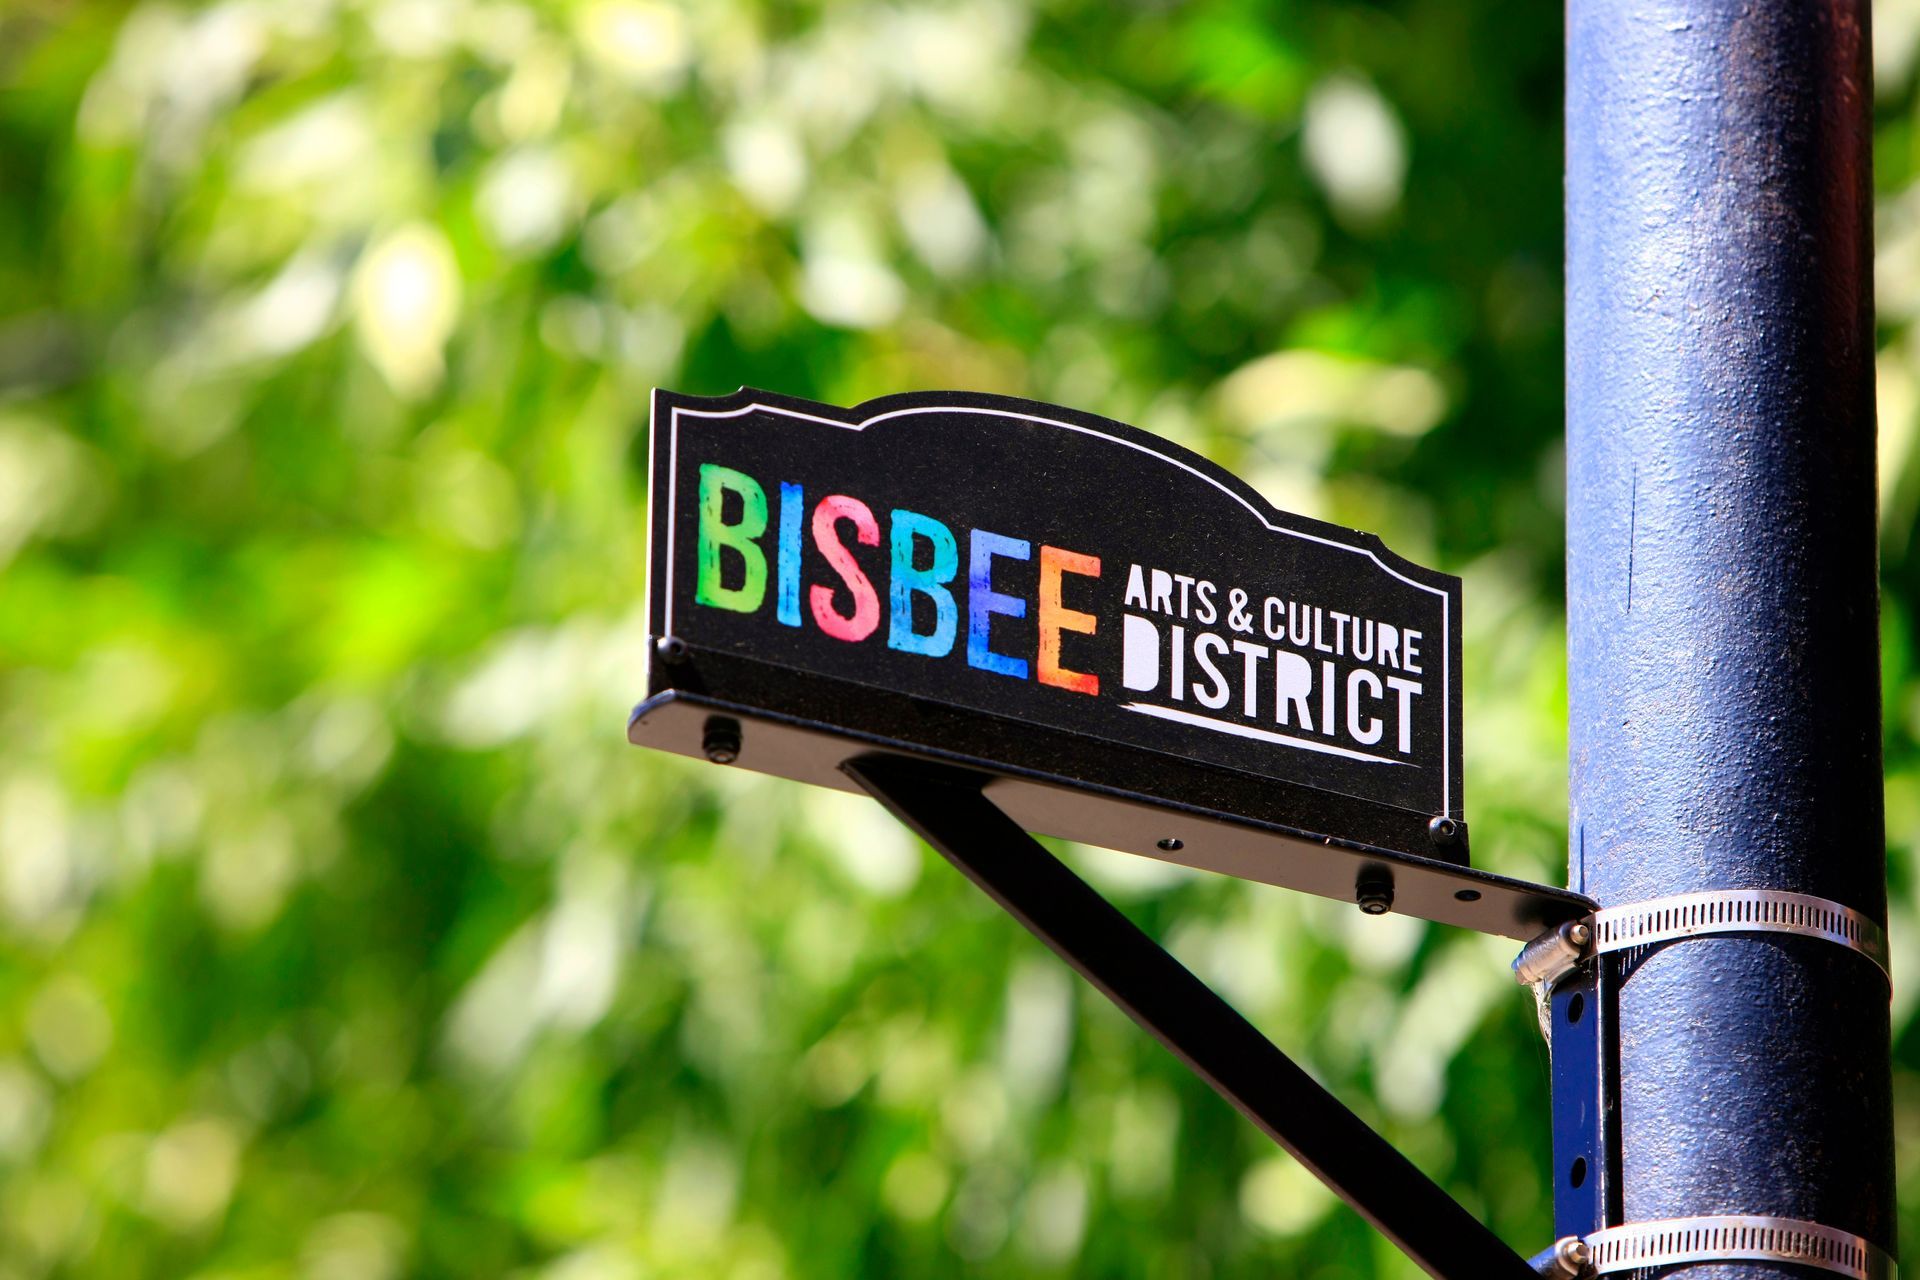 bisbee-arts-and-culture-district-street-sign